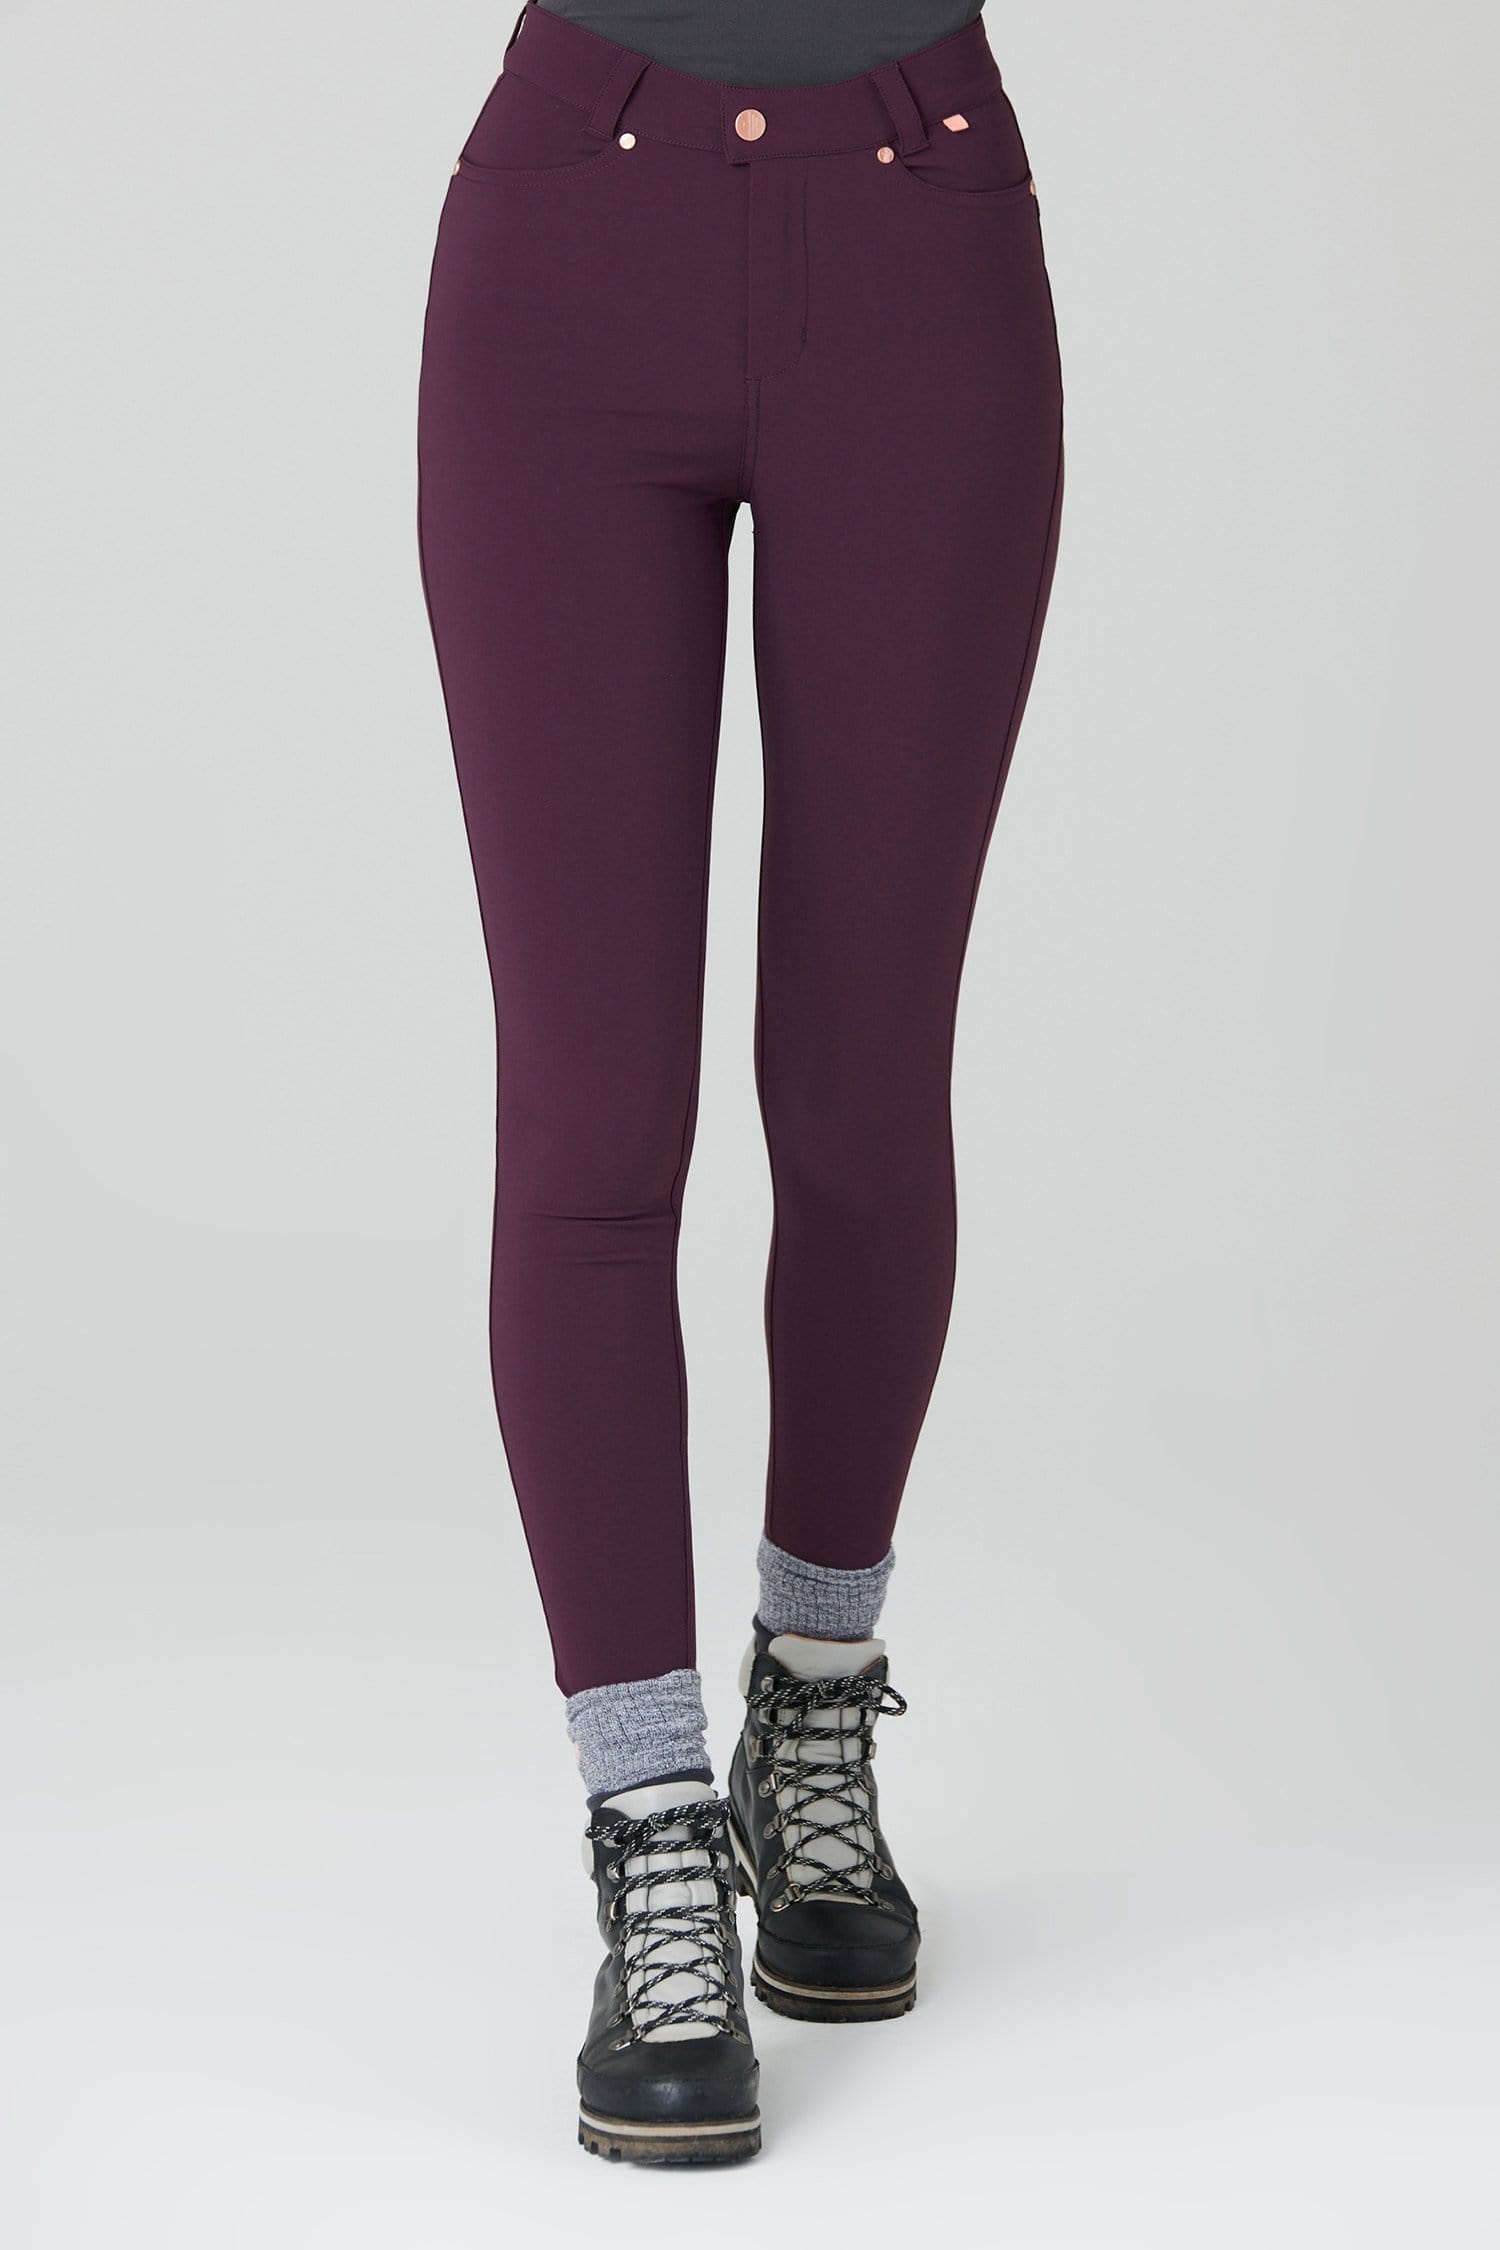 Max Stretch Skinny Outdoor Trousers - Aubergine - 28l / Uk10 - Womens - Acai Outdoorwear